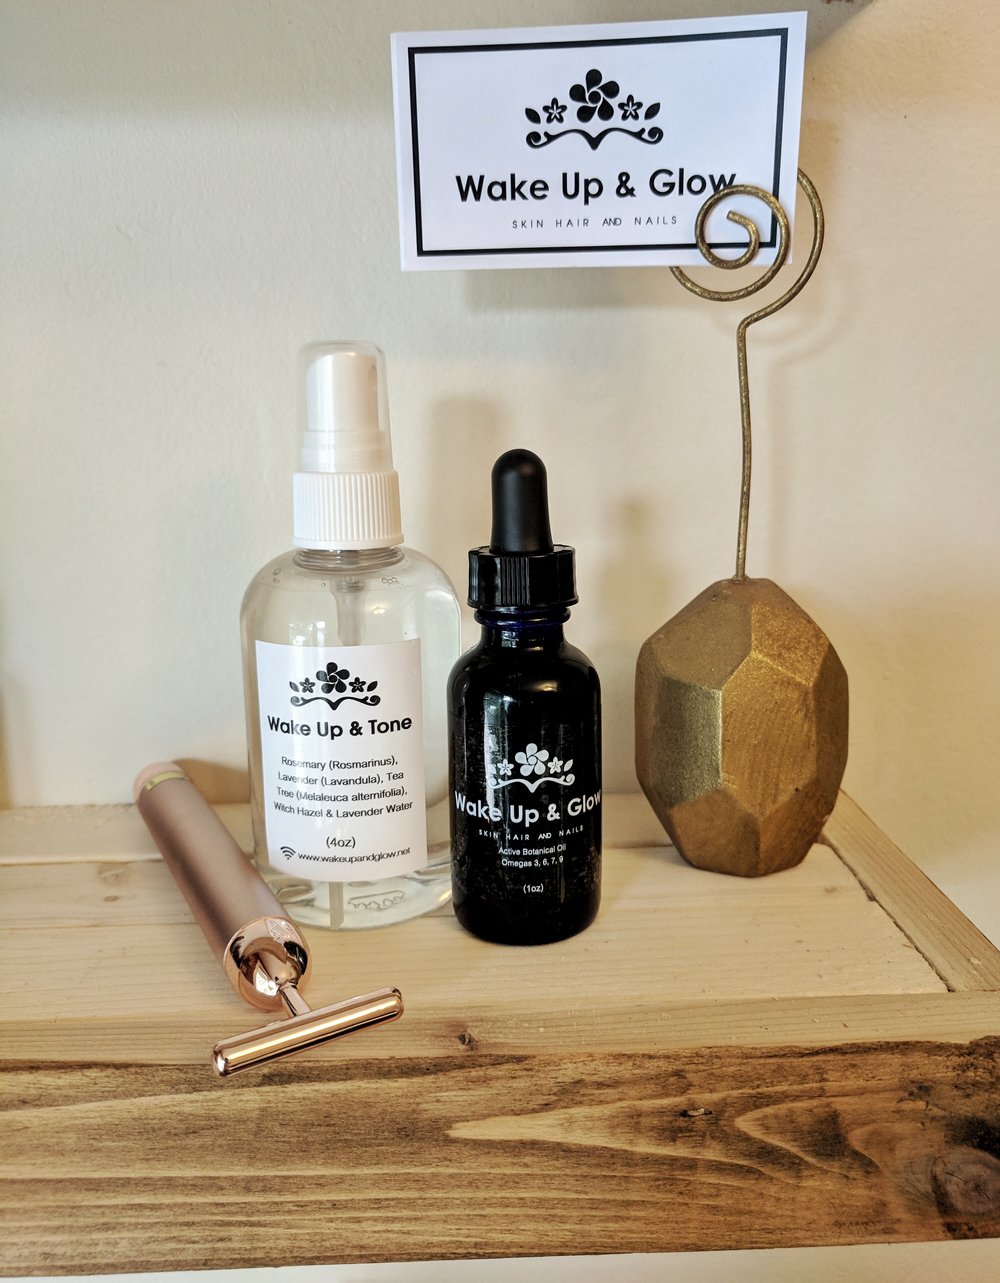 Labour Day Weekend Special- 1oz oil, toner and rose gold bar $120